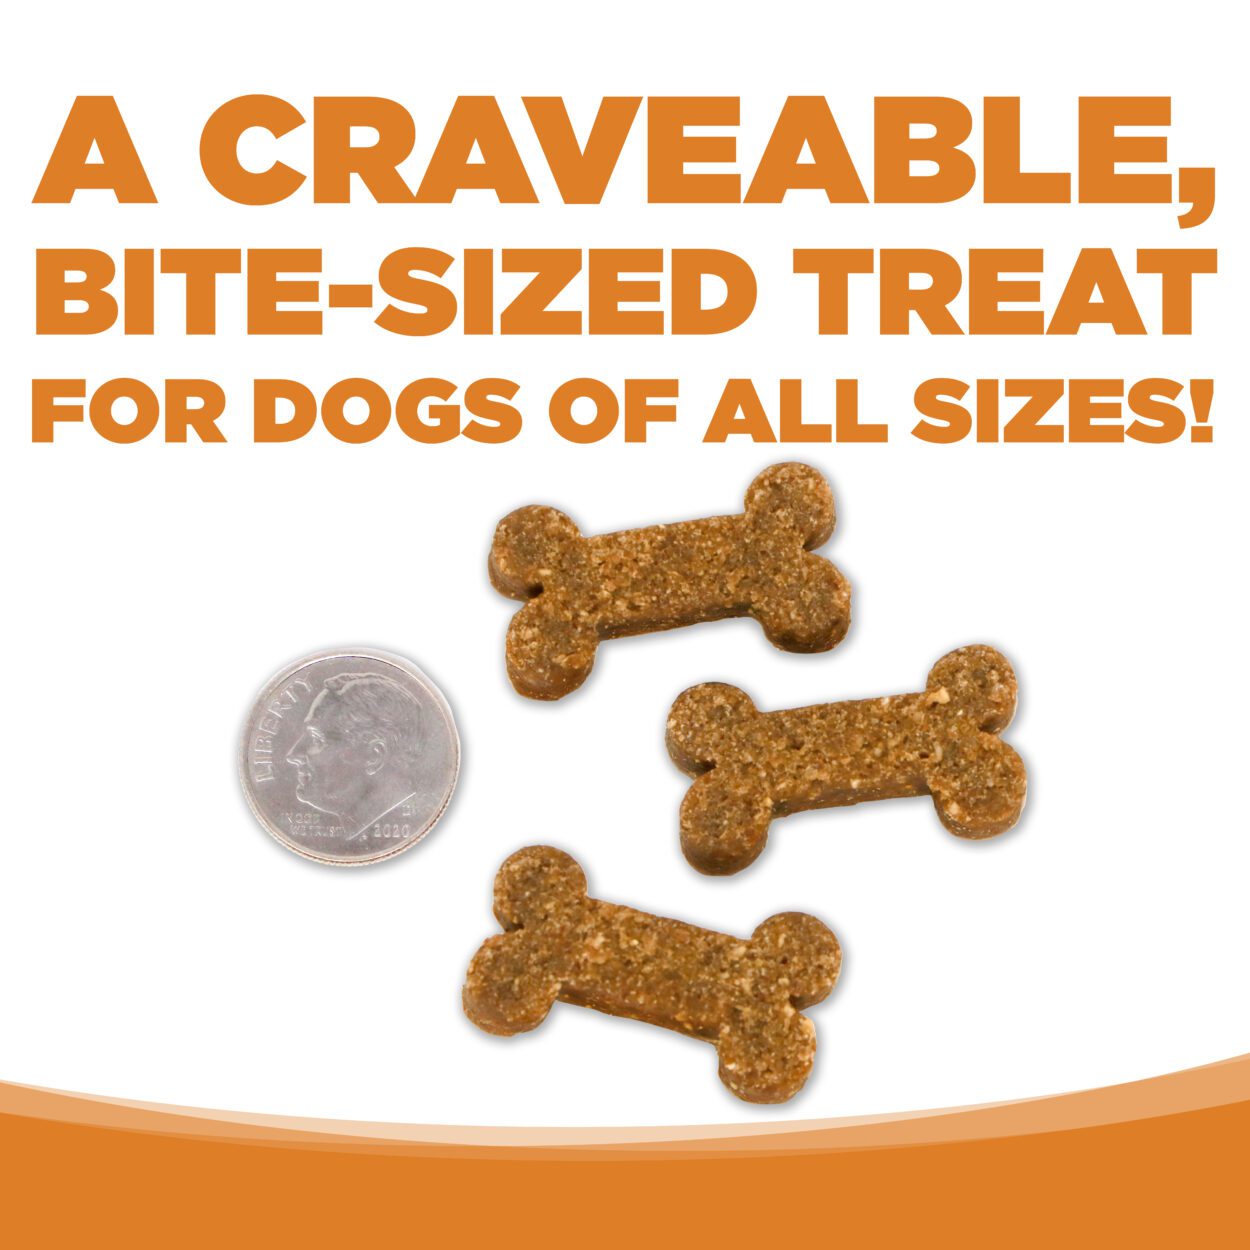 A CRAVEABLE, BITE-SIZED TREAT FOR DOGS OF ALL SIZES!